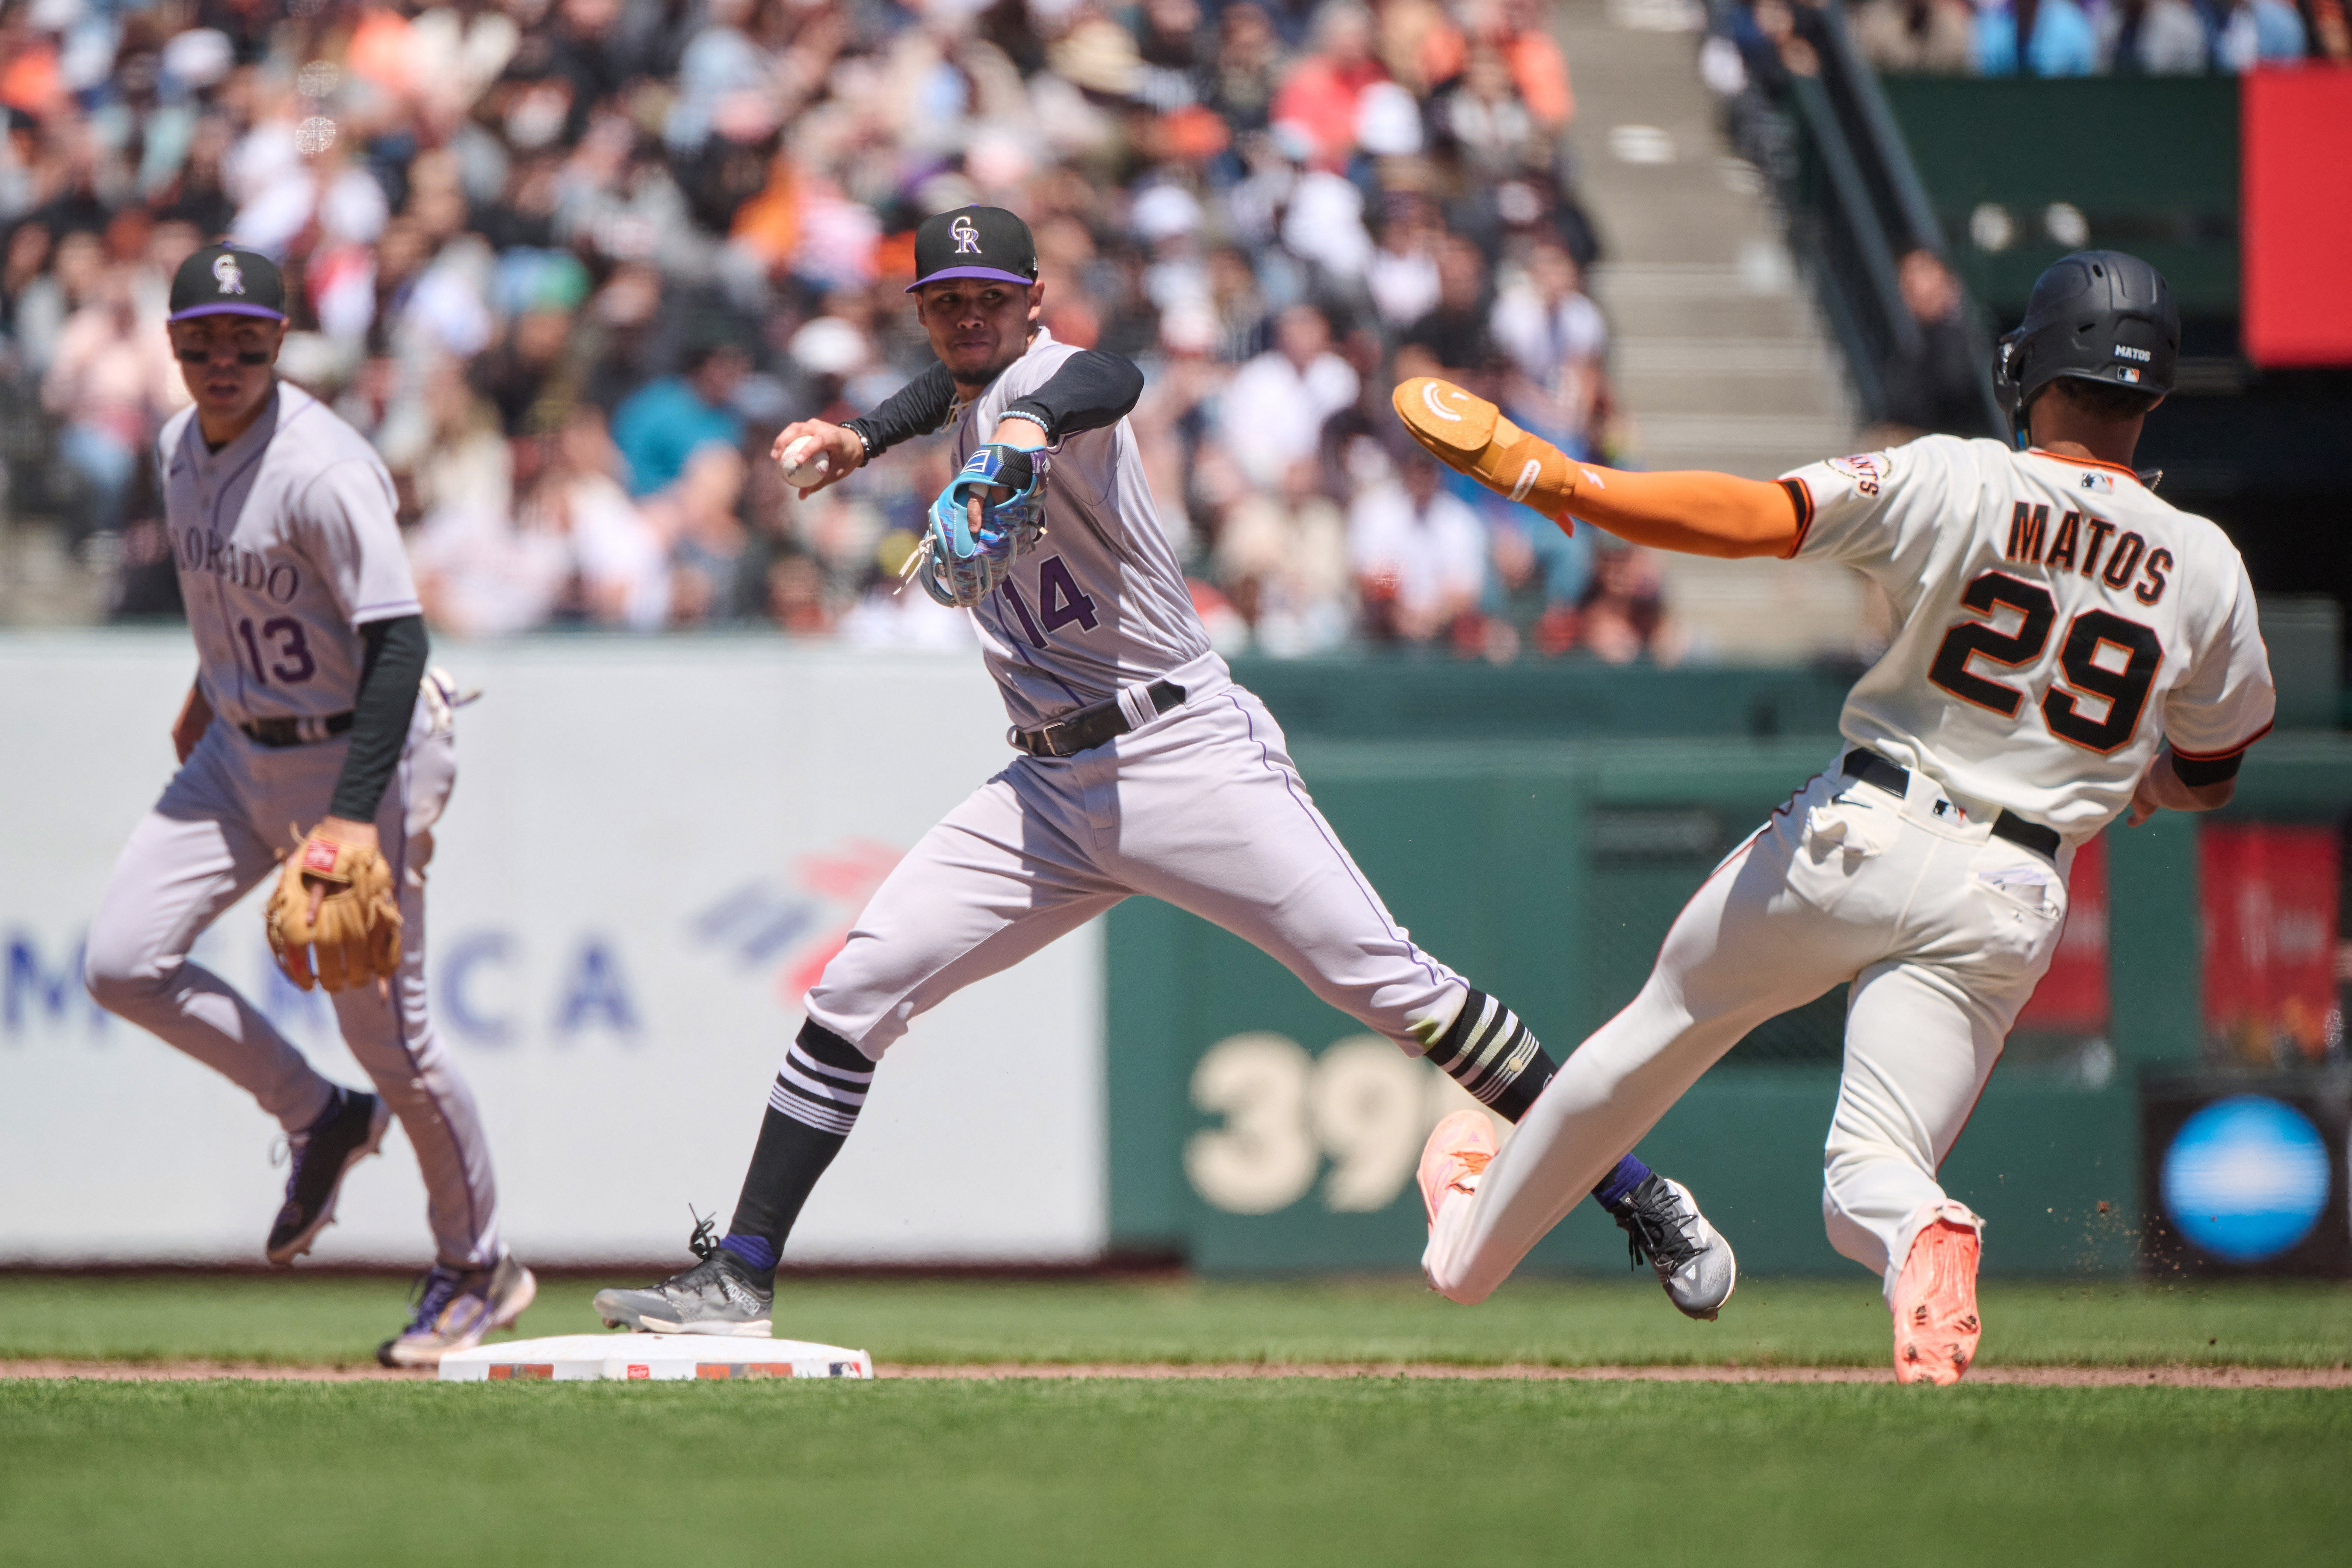 Fully equipped Giants lineup routs Rockies, 10-4 – KNBR